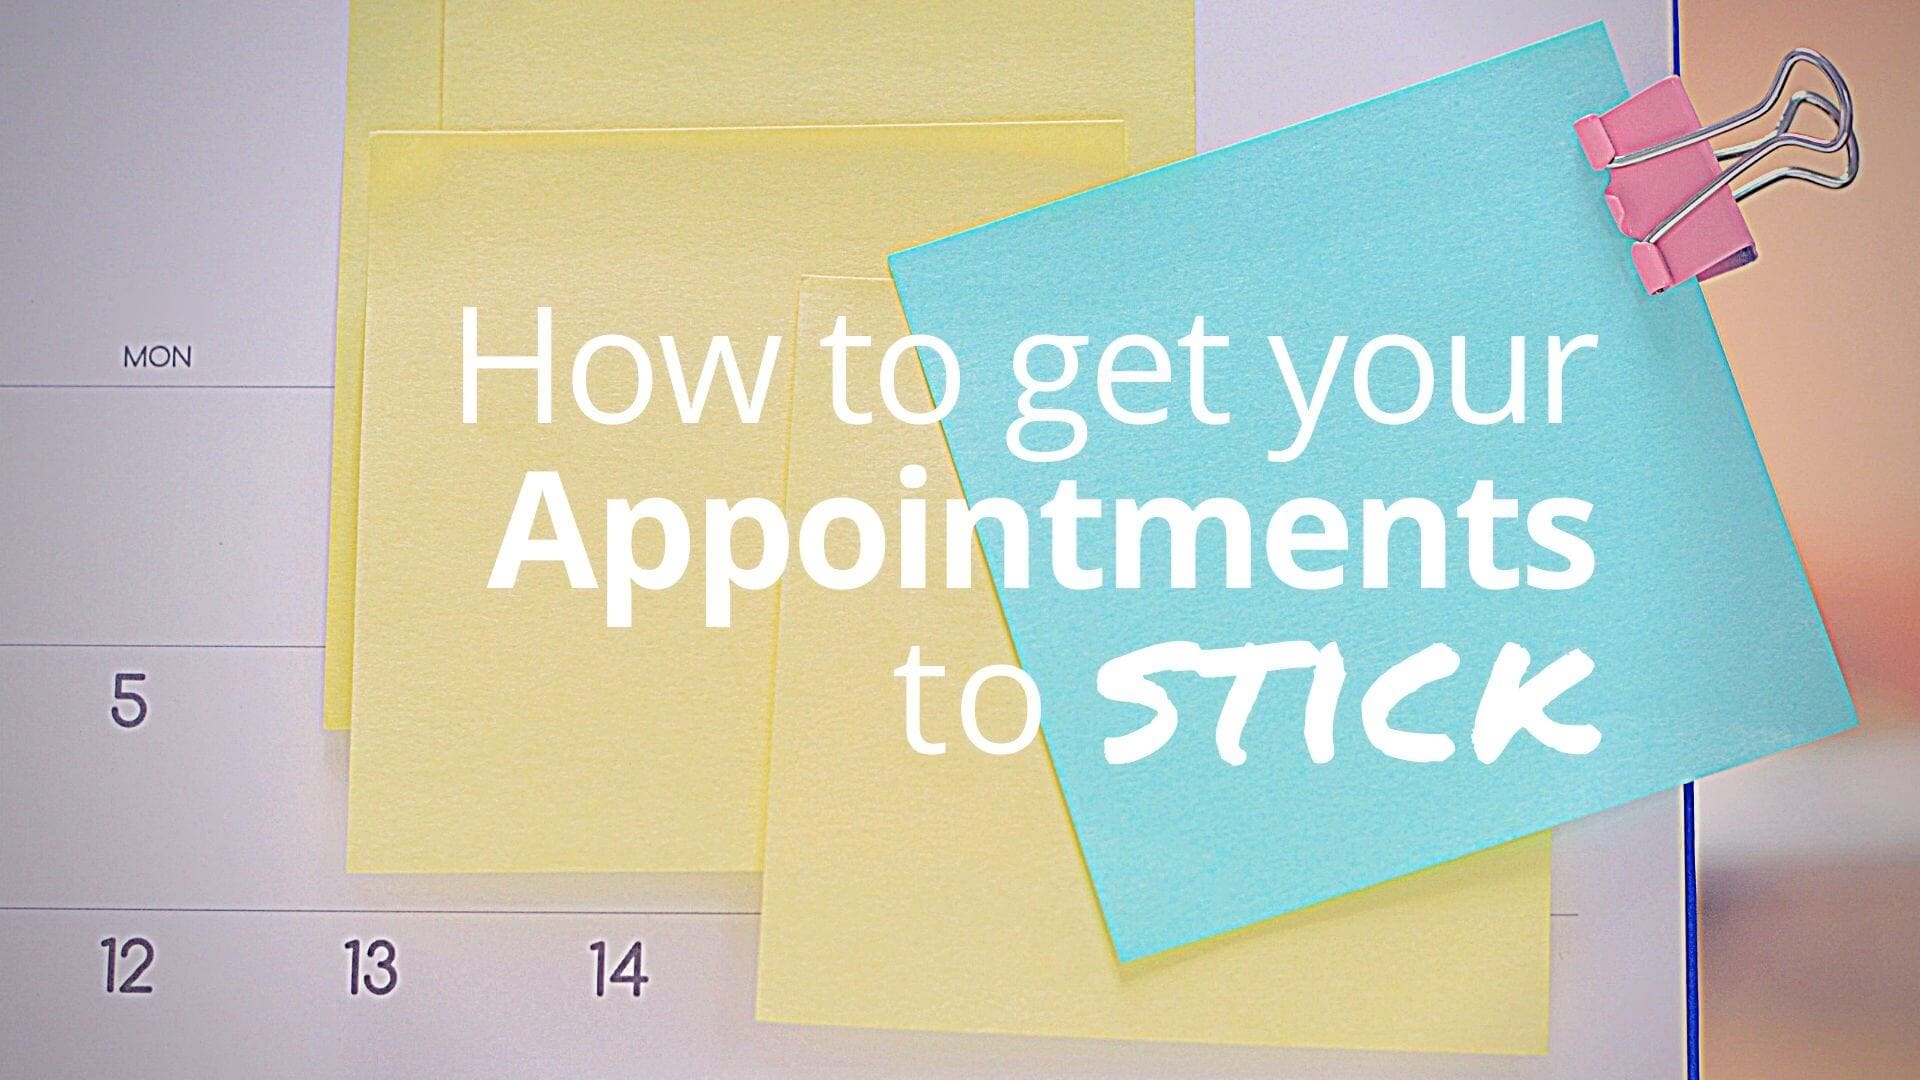 5 Strategies to Help Your Appointments to Stick